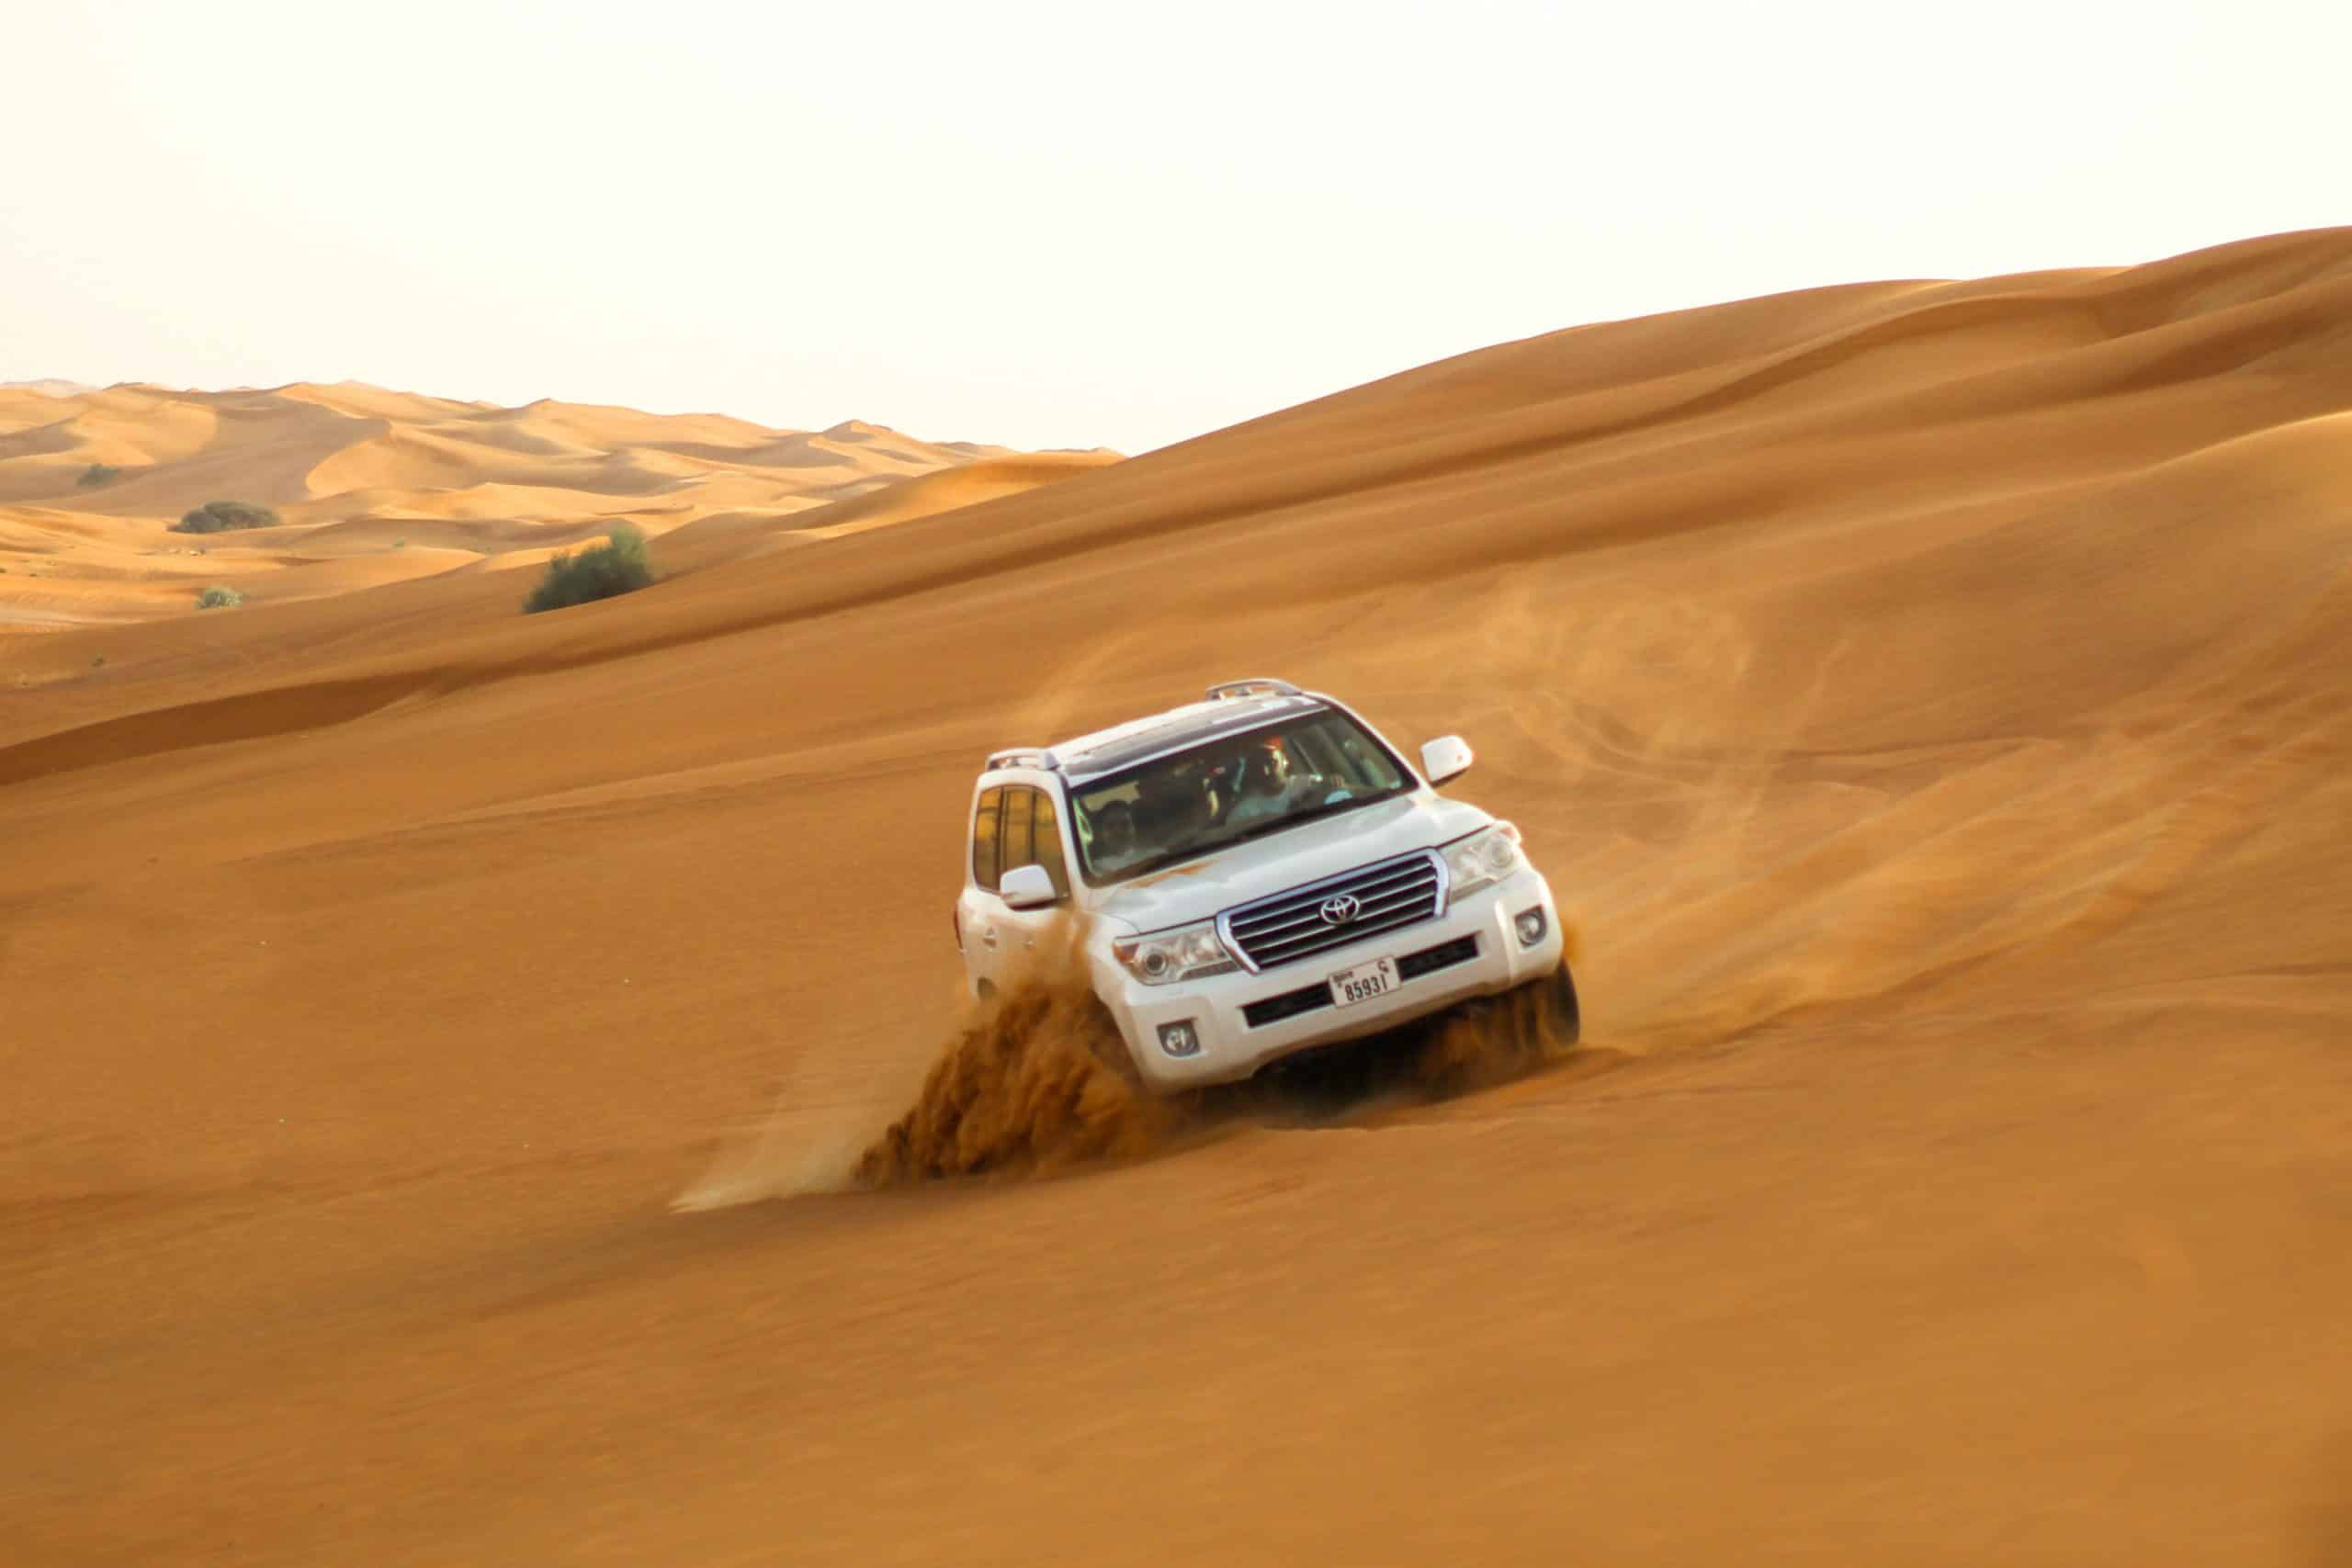 This is the picture of Desert Safari from Abu Dhabi